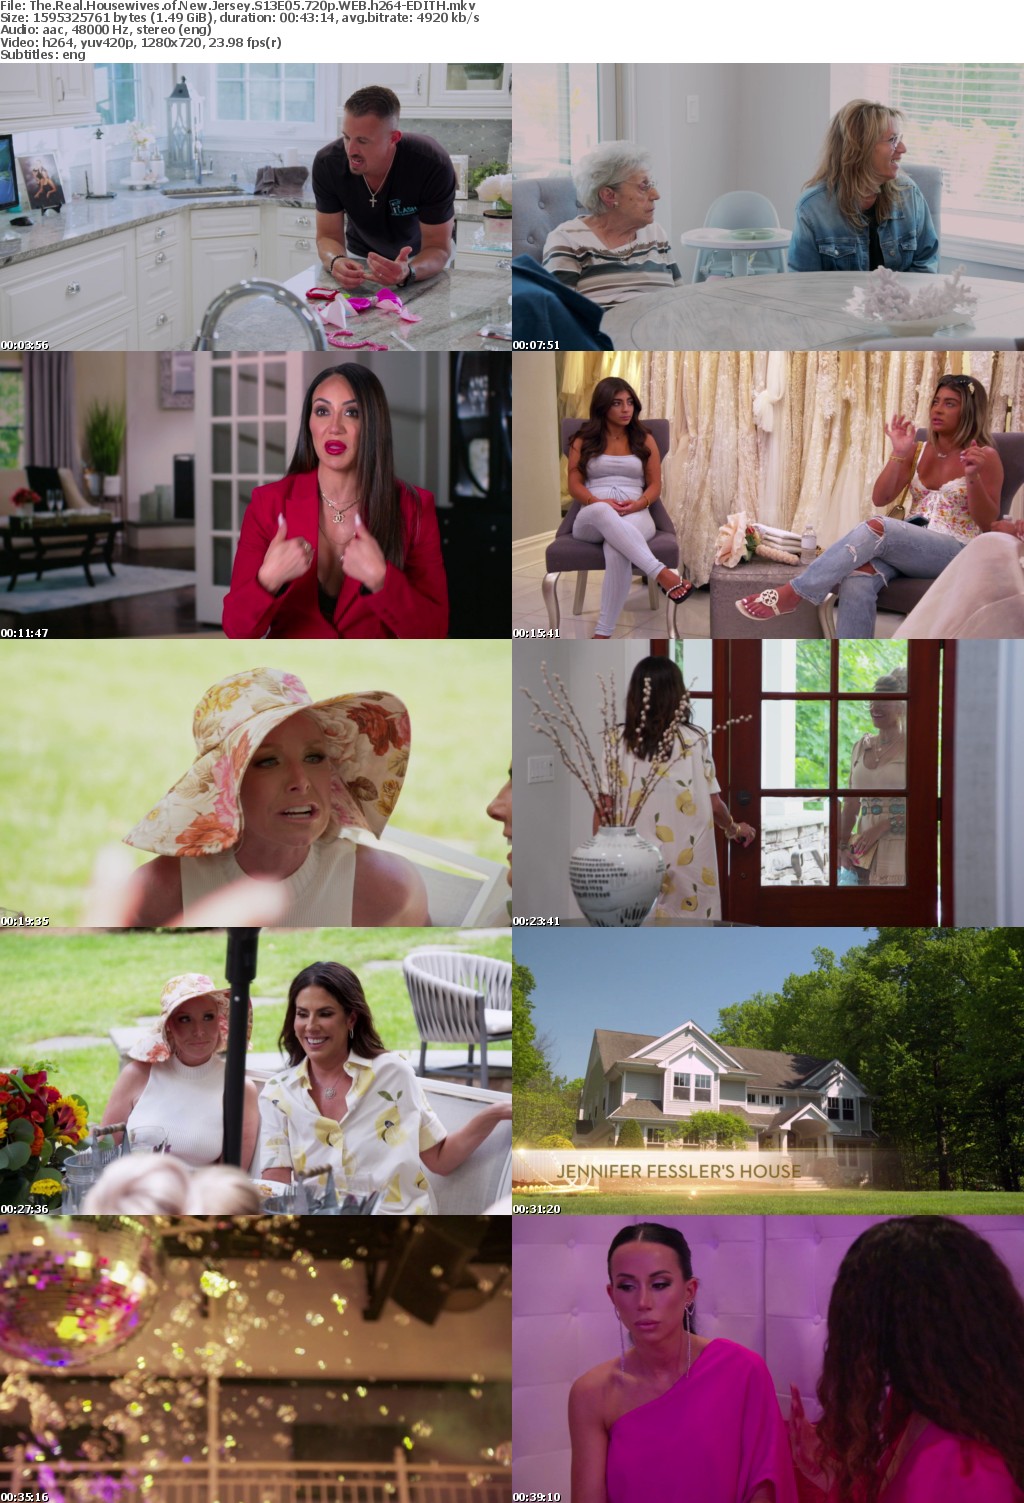 The Real Housewives of New Jersey S13E05 720p WEB h264-EDITH